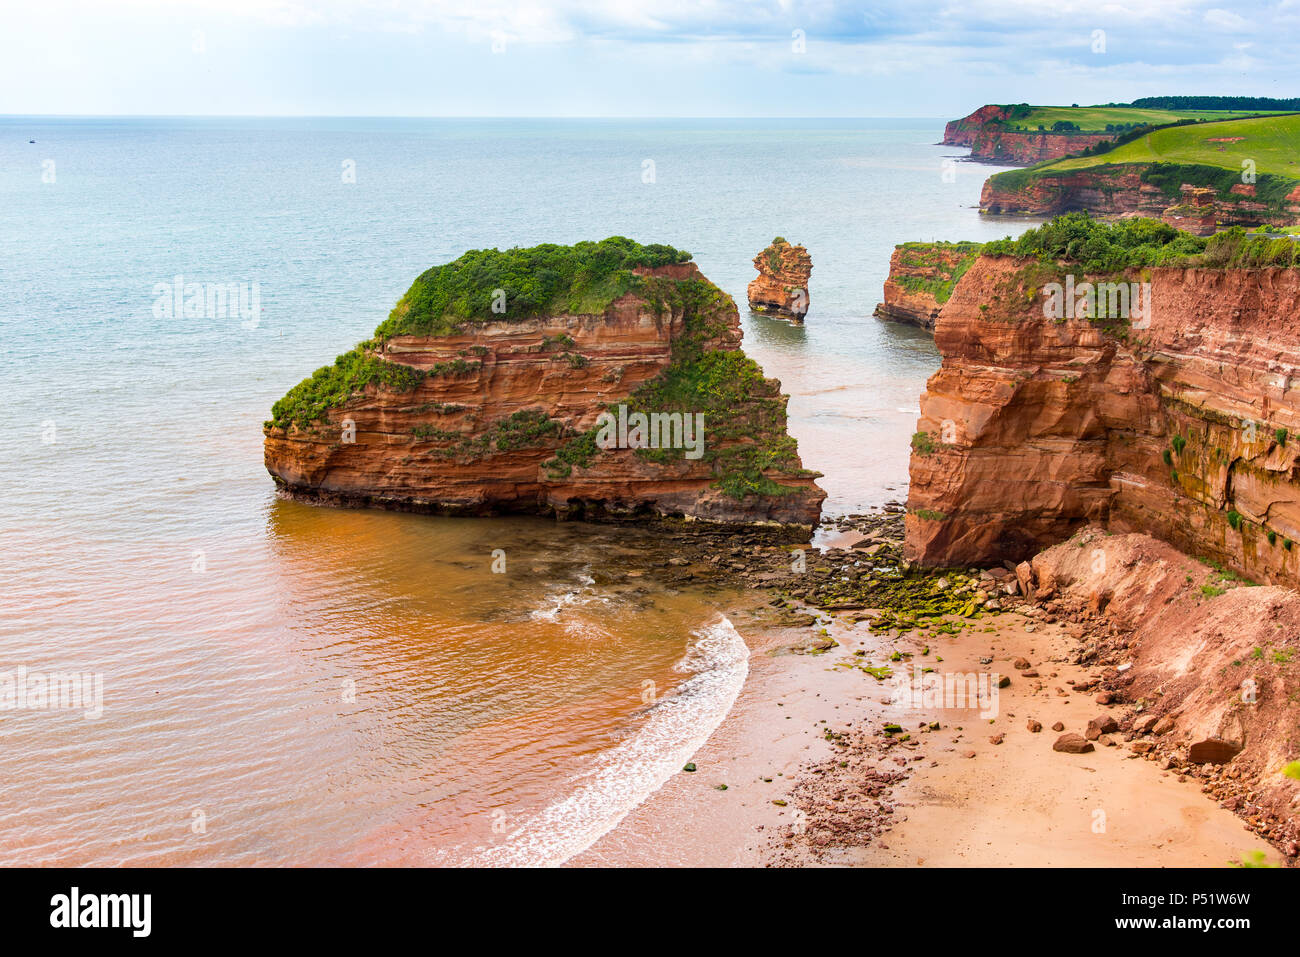 Hern Rock, Ladram Bay, between Budleigh Salterton and Sidmouth, East Devon, UK. Stock Photo